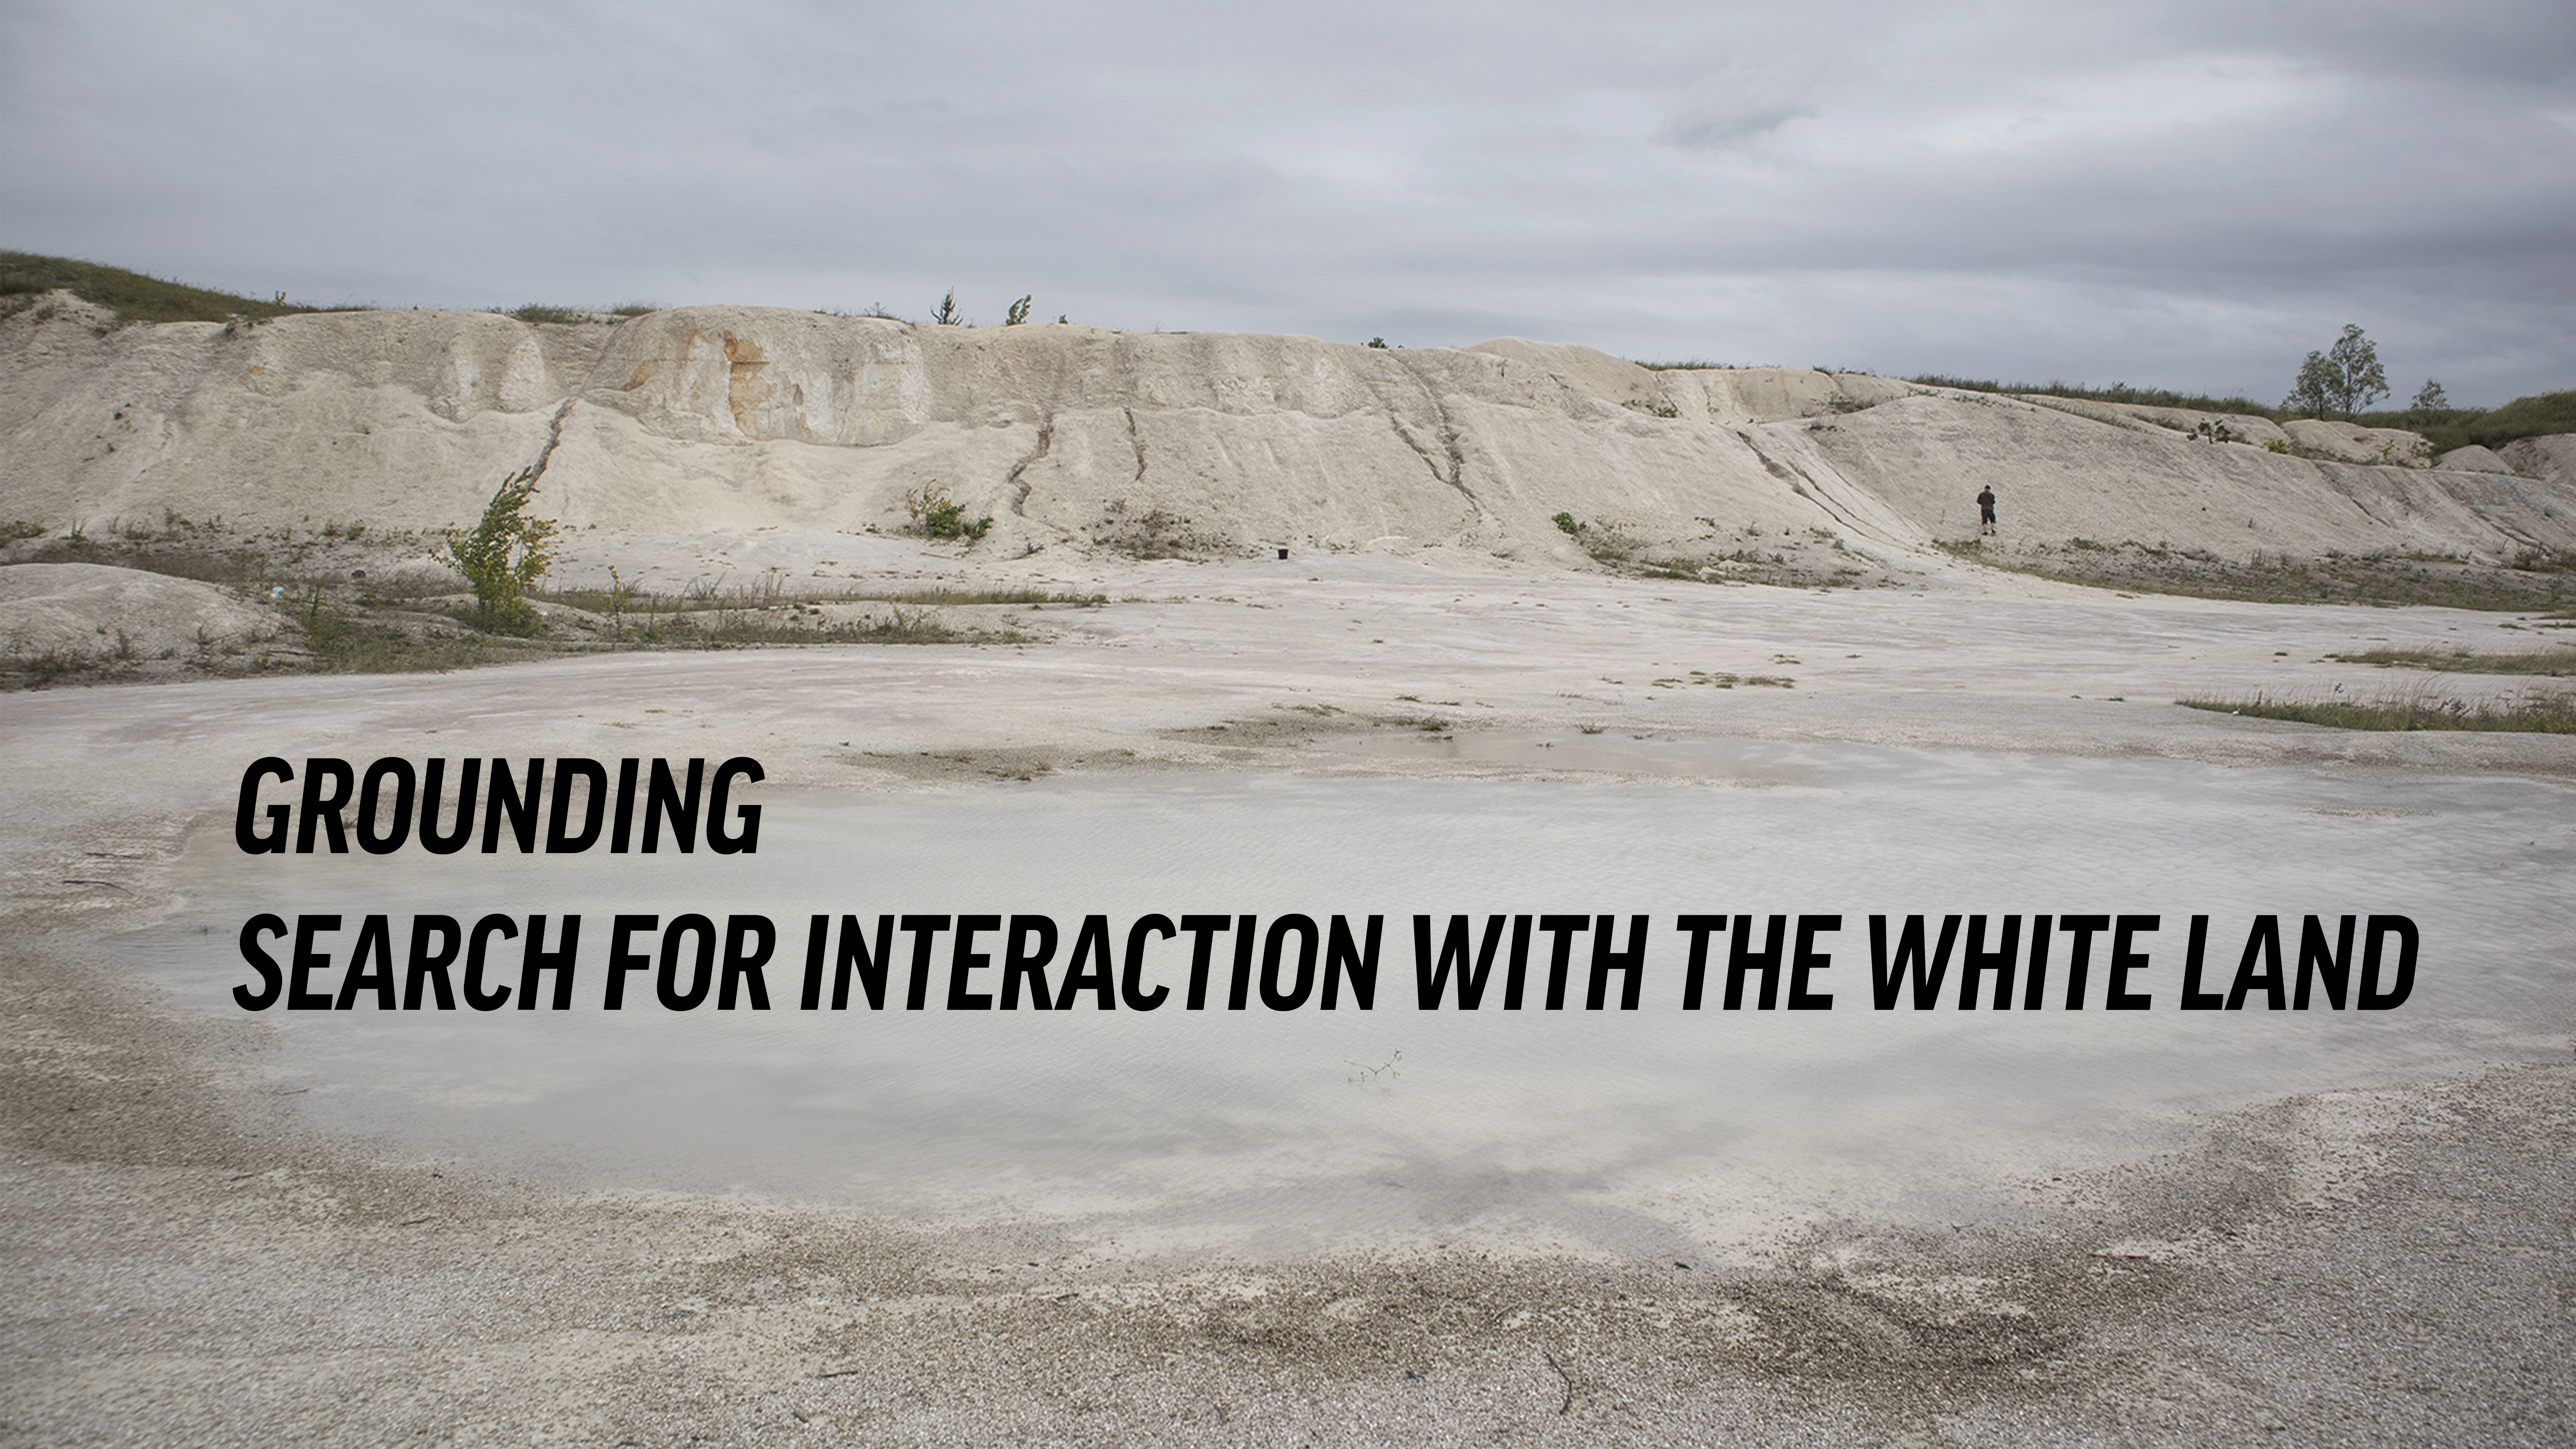 Grounding. Search for Interaction with the White Land